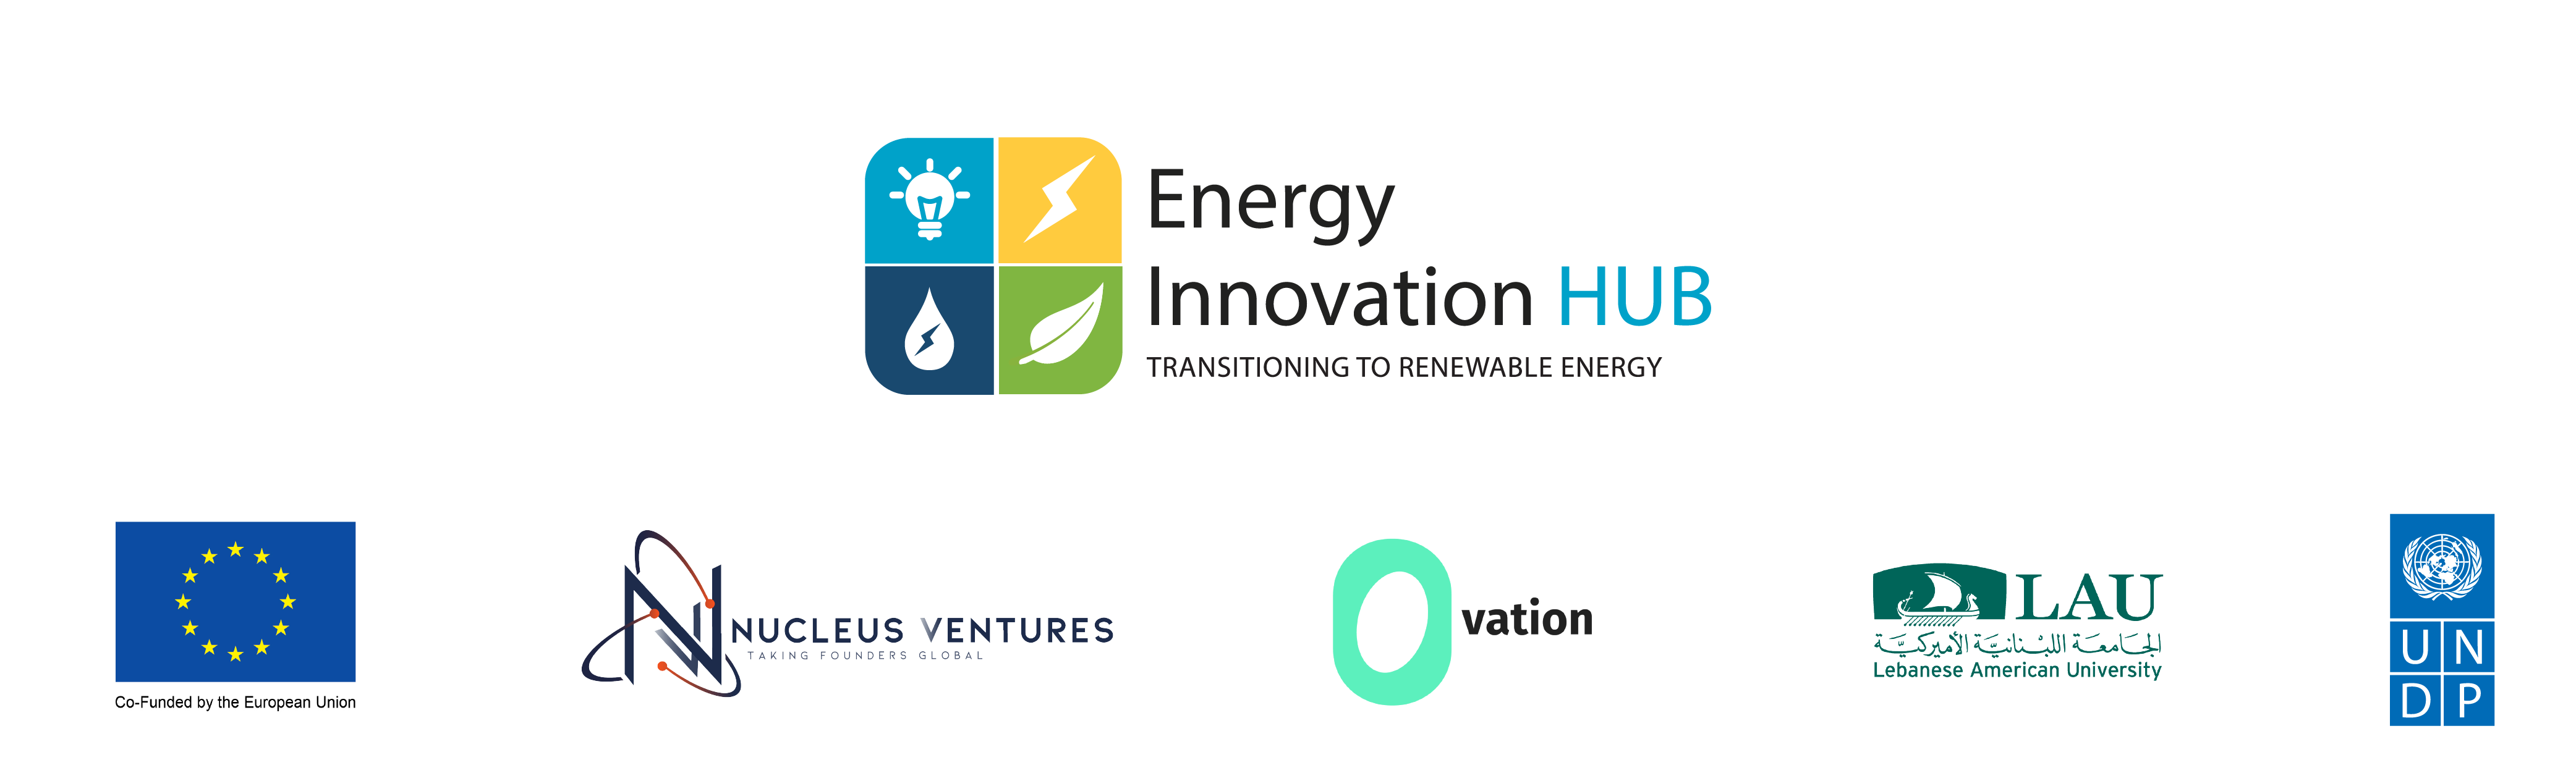 The EU and the UNDP launch the Energy Innovation Hub in collaboration with Nucleus Ventures